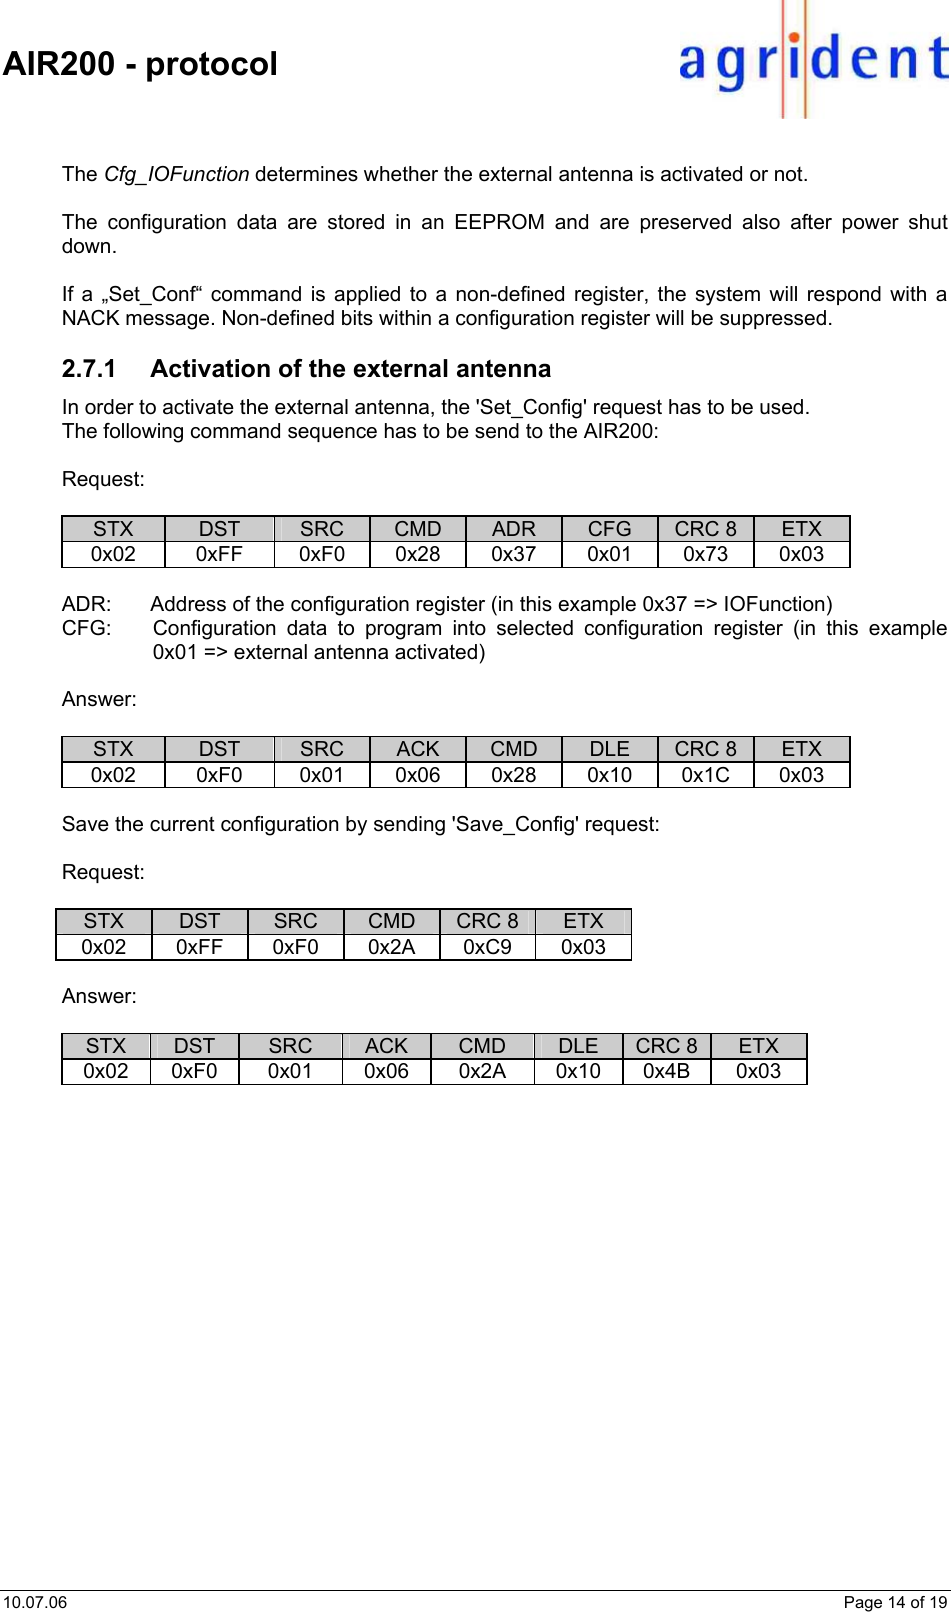    AIR200 - protocol  10.07.06    Page 14 of 19  The Cfg_IOFunction determines whether the external antenna is activated or not.  The configuration data are stored in an EEPROM and are preserved also after power shut down.  If a „Set_Conf“ command is applied to a non-defined register, the system will respond with a NACK message. Non-defined bits within a configuration register will be suppressed.  2.7.1 Activation of the external antenna In order to activate the external antenna, the &apos;Set_Config&apos; request has to be used. The following command sequence has to be send to the AIR200:  Request:  STX  DST  SRC  CMD  ADR  CFG  CRC 8  ETX 0x02 0xFF 0xF0 0x28 0x37 0x01 0x73 0x03  ADR:  Address of the configuration register (in this example 0x37 =&gt; IOFunction) CFG:  Configuration data to program into selected configuration register (in this example 0x01 =&gt; external antenna activated)  Answer:  STX  DST  SRC  ACK  CMD  DLE  CRC 8  ETX 0x02 0xF0 0x01 0x06 0x28 0x10 0x1C 0x03  Save the current configuration by sending &apos;Save_Config&apos; request:  Request:  STX  DST  SRC  CMD  CRC 8  ETX 0x02 0xFF 0xF0 0x2A 0xC9 0x03  Answer:  STX  DST  SRC  ACK  CMD  DLE  CRC 8  ETX 0x02 0xF0  0x01  0x06  0x2A 0x10 0x4B 0x03  